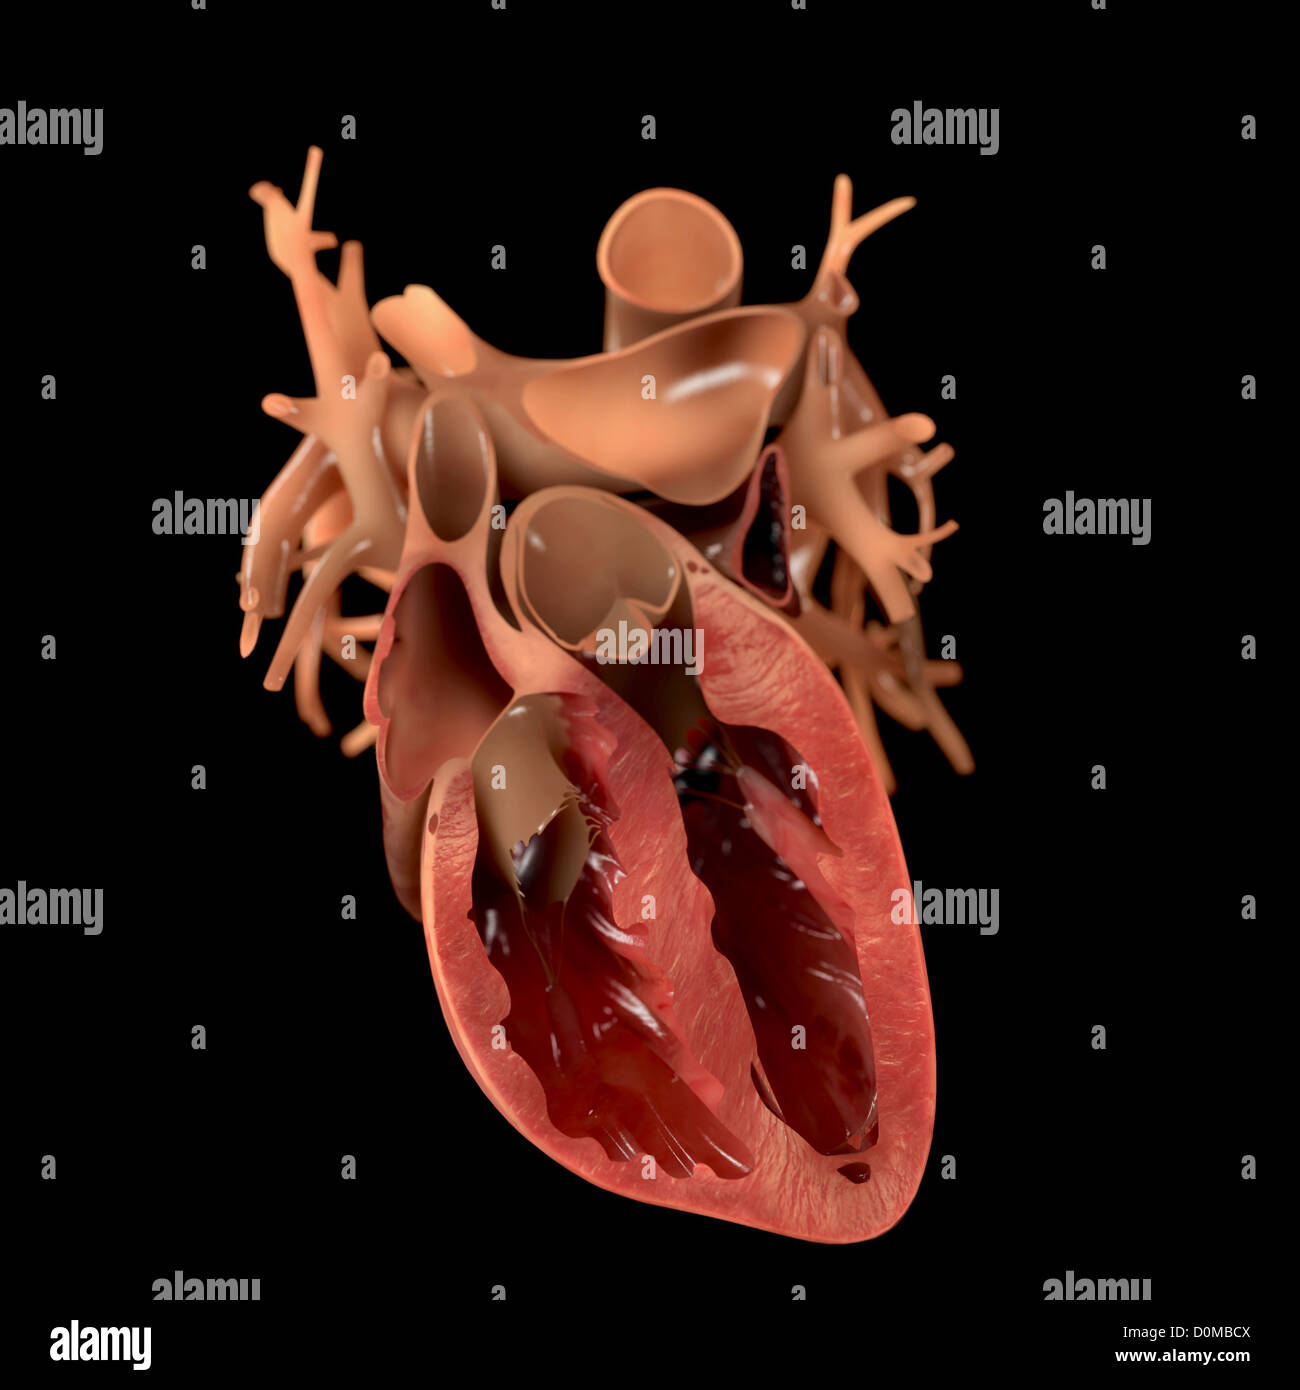 Diagram of a heart, showing an anterior cut. Stock Photo